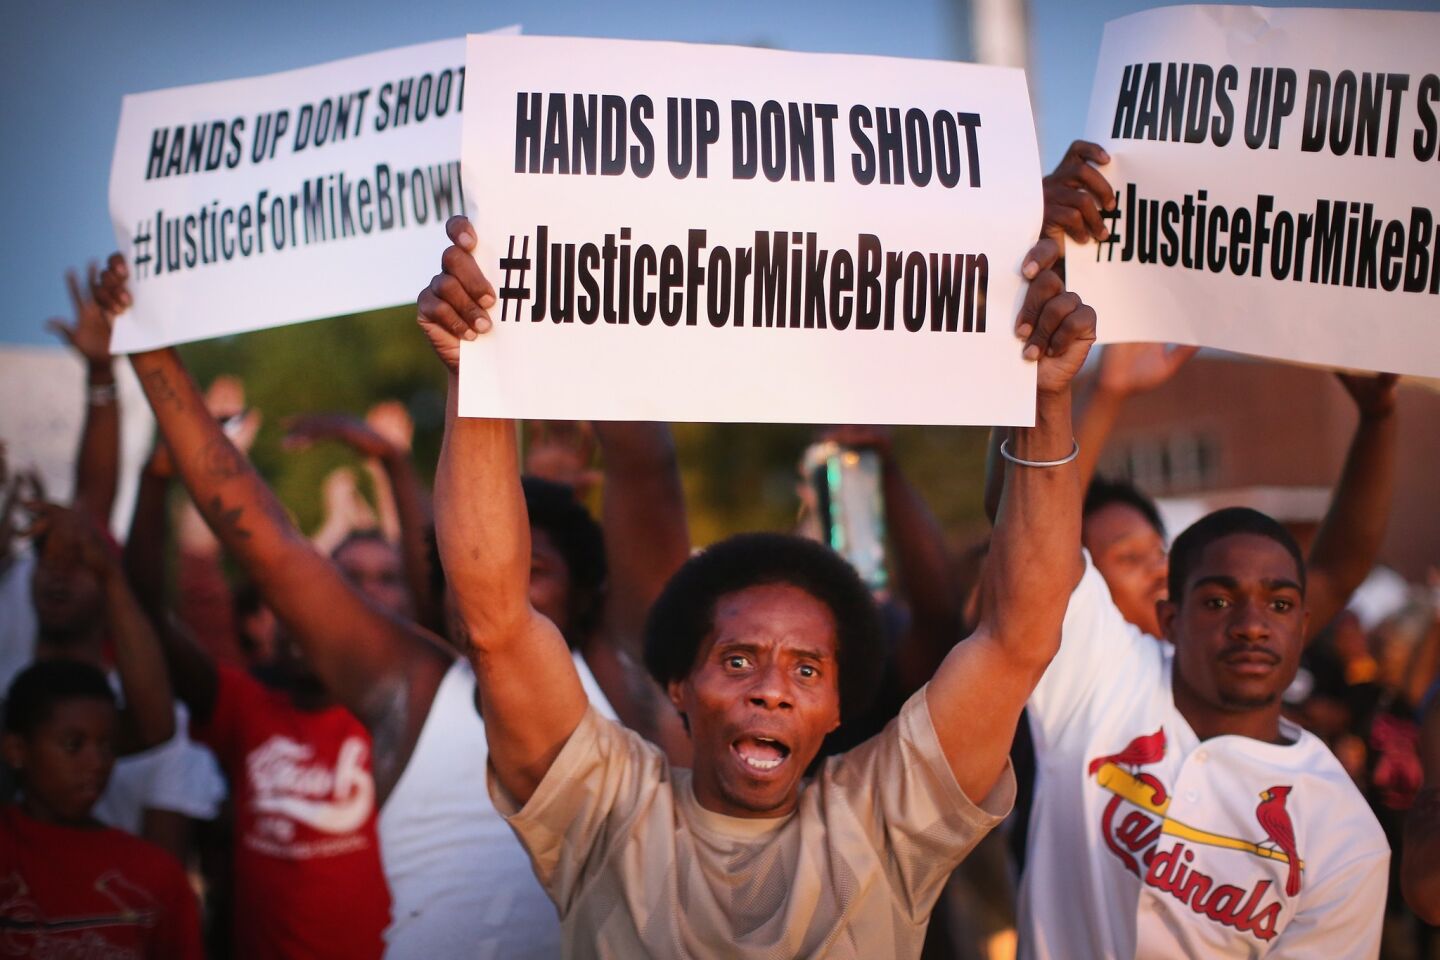 Demonstrators protesting the killing of Michael Brown rally in St. Louis.